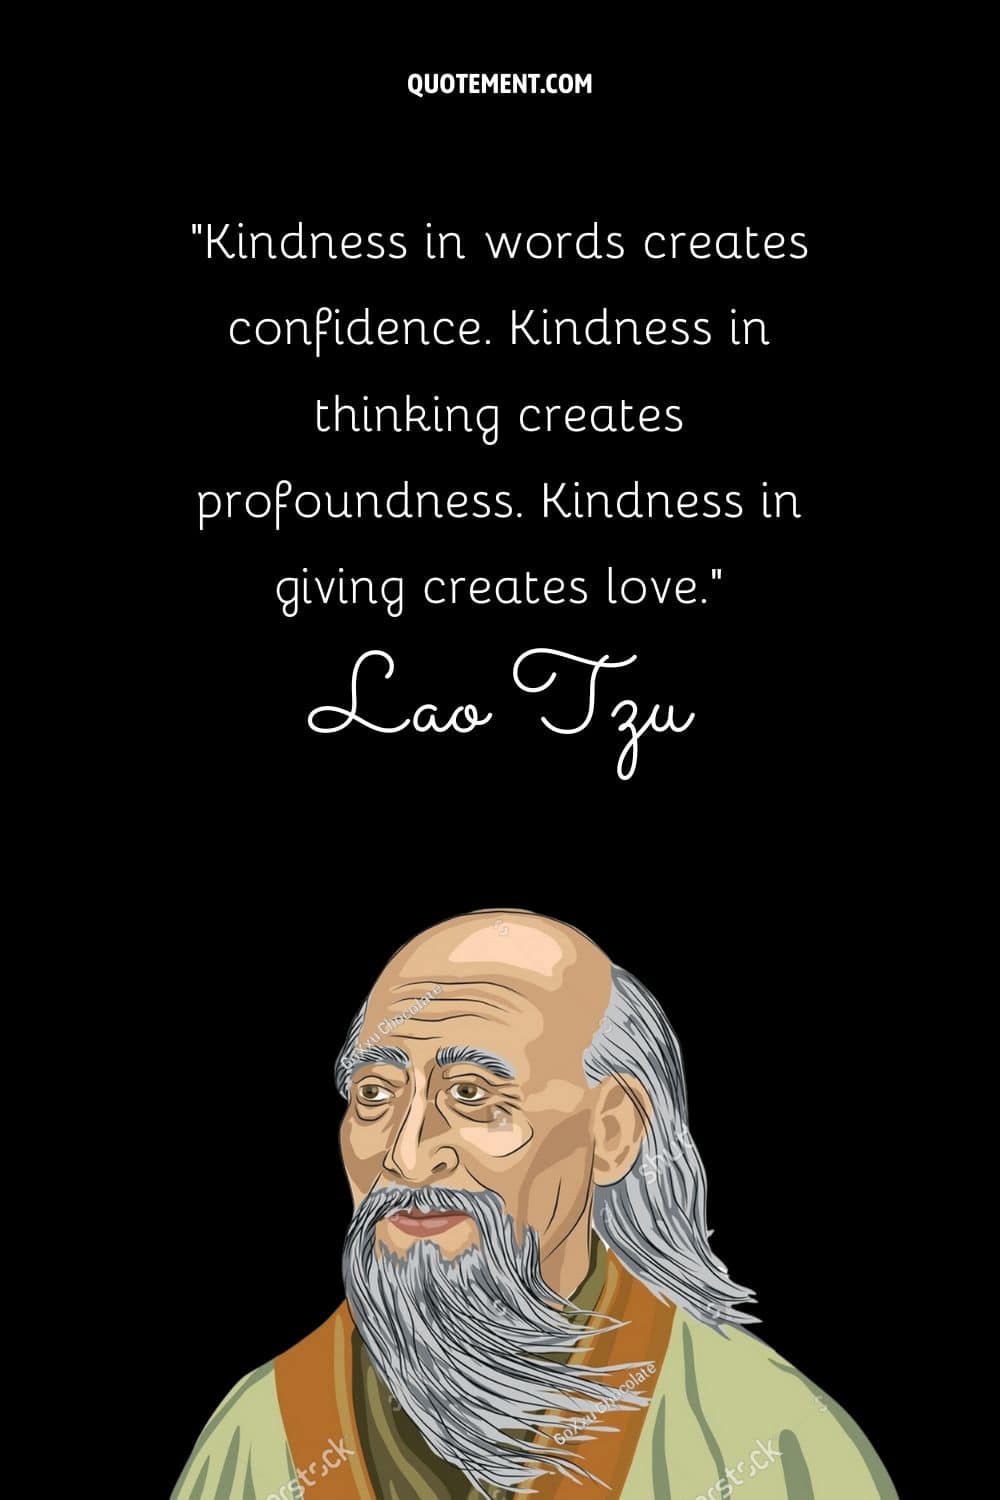 Kindness in words creates confidence. Kindness in thinking creates profoundness. Kindness in giving creates love